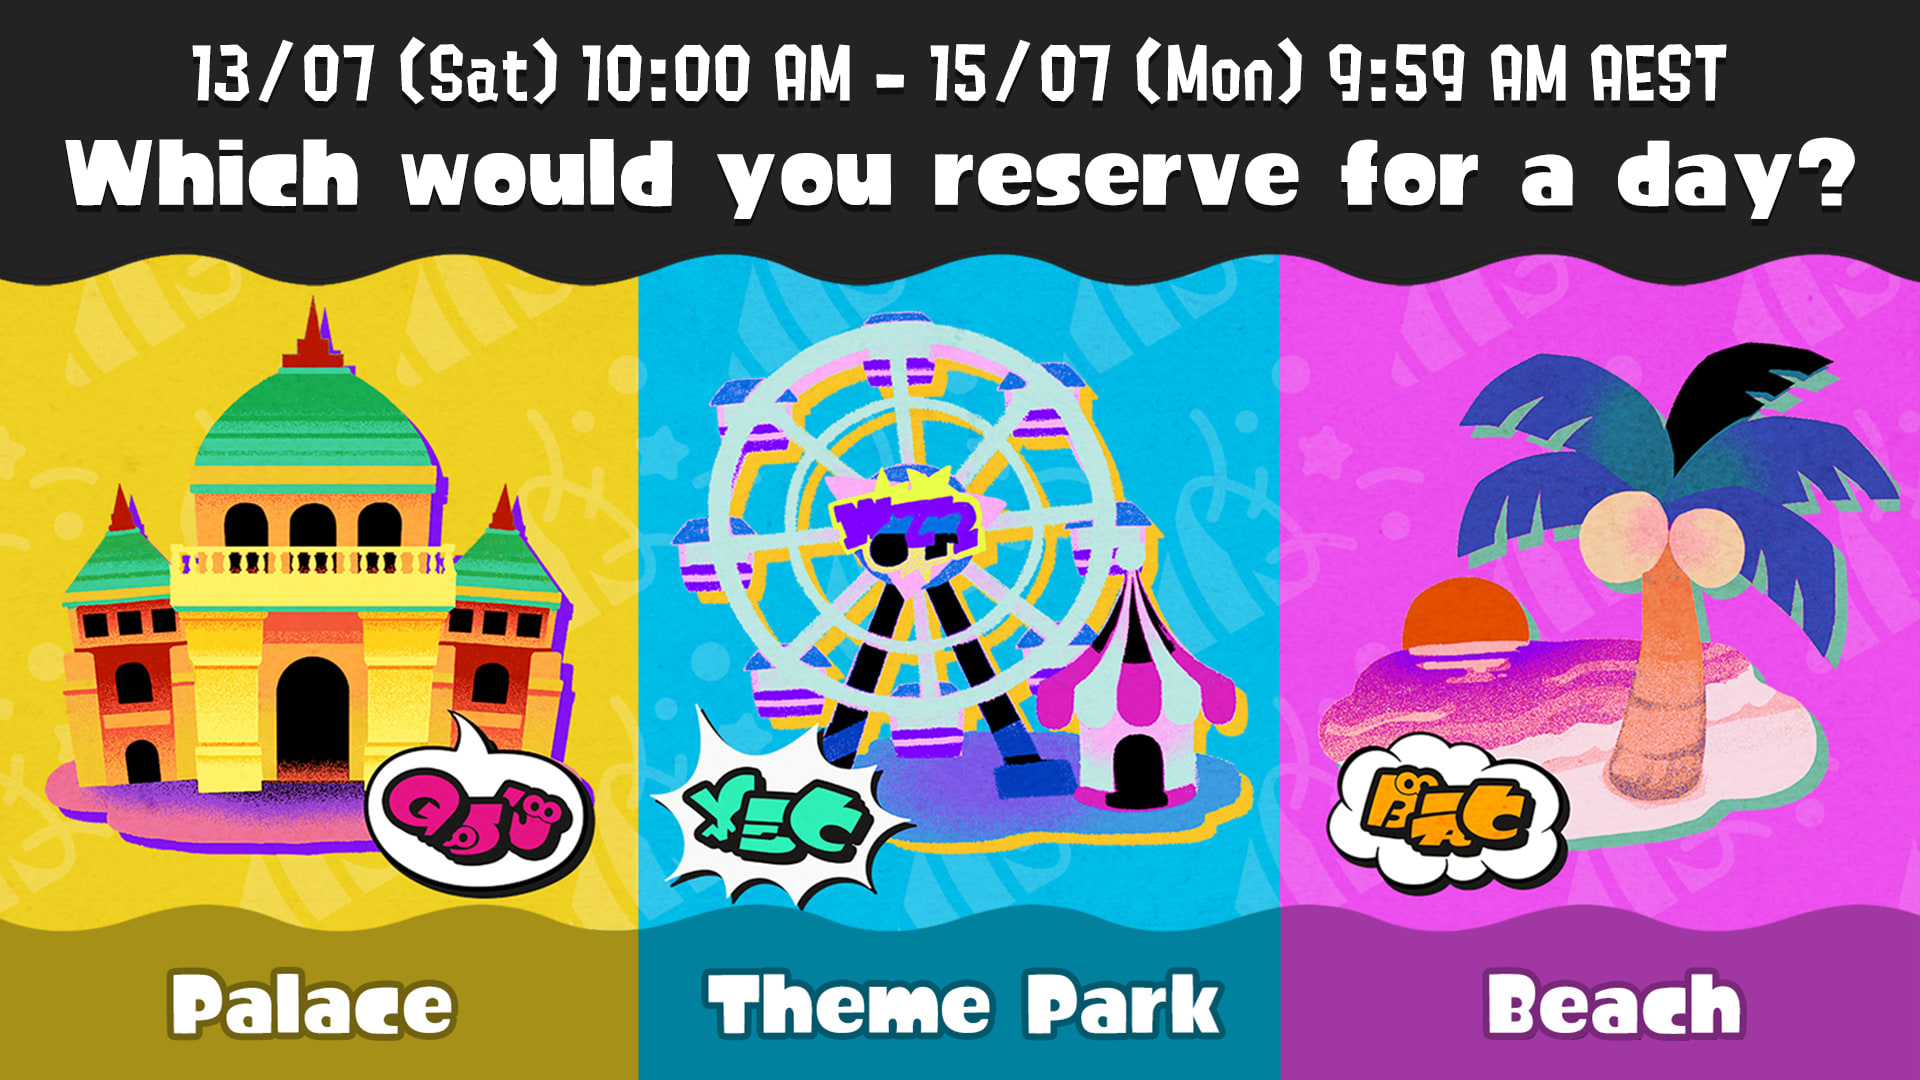 Which would you reserve for a day? A palace, a theme park or a beach?